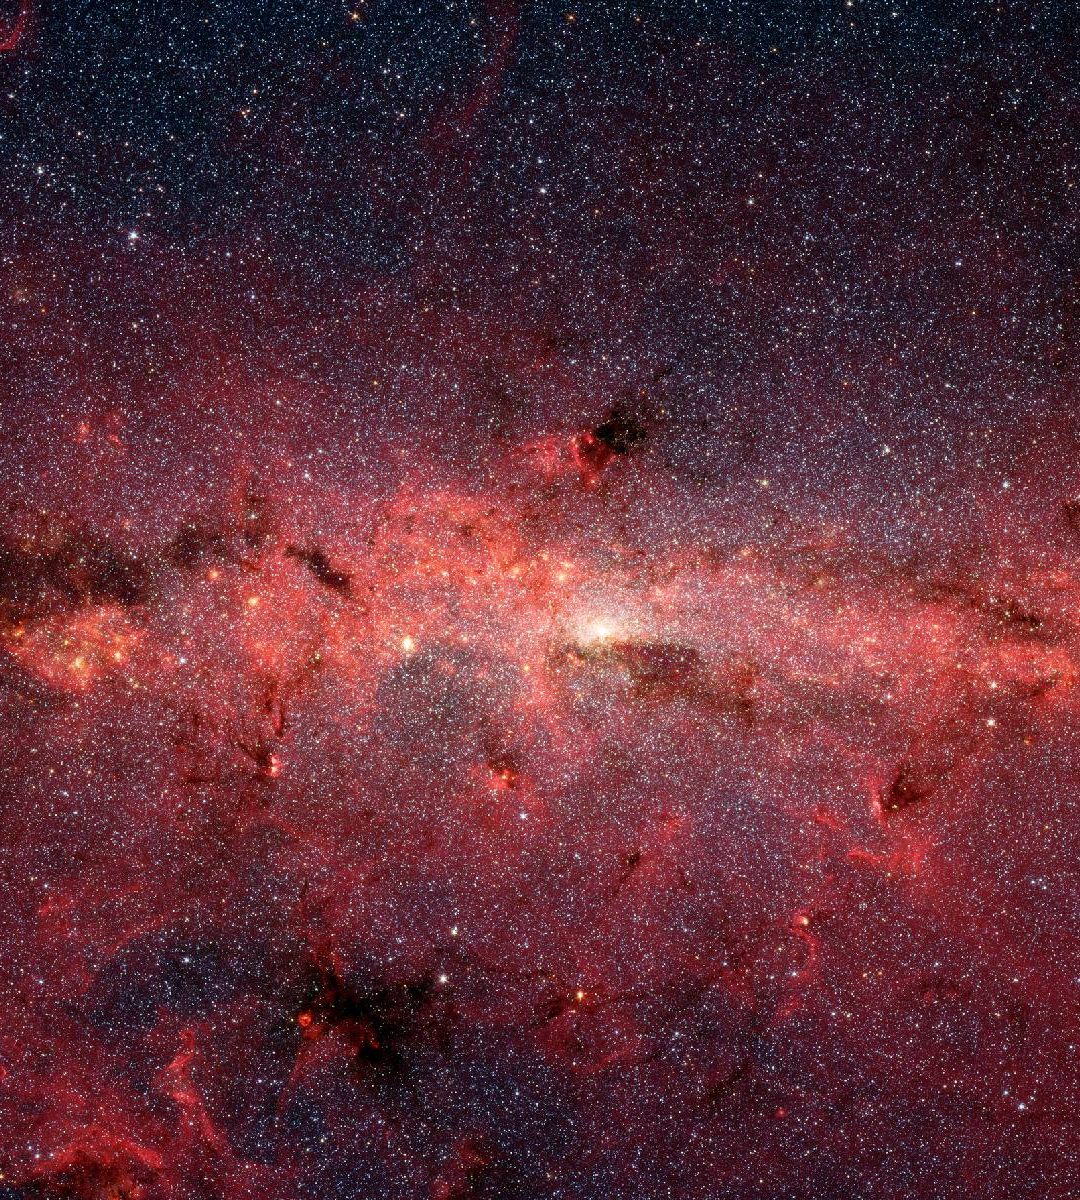 New Moon in the Galactic Center